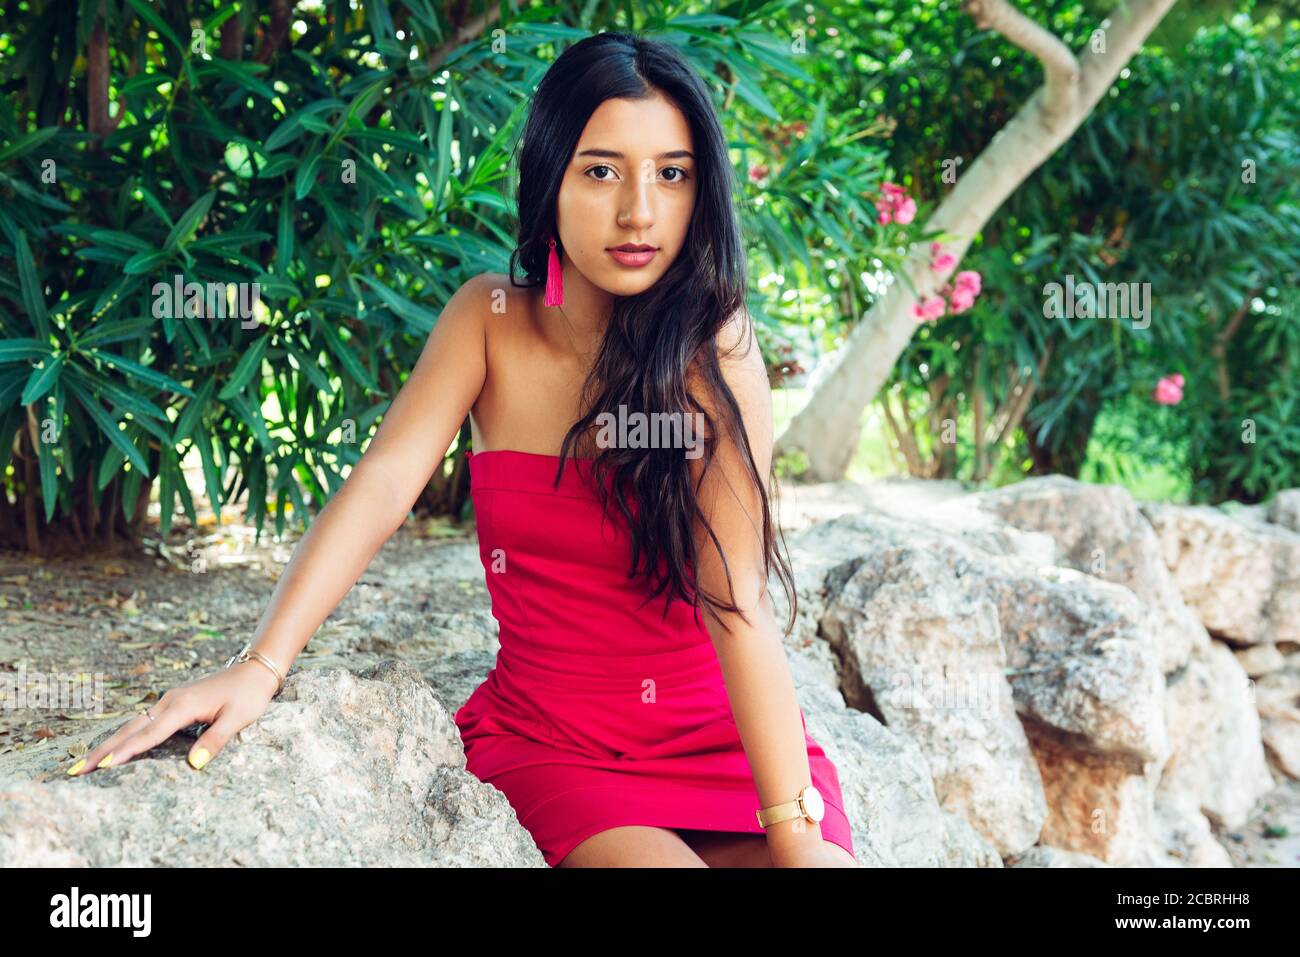 Young Latin girl with long black hair and red dress, in an area of vegetation and rocks. Stock Photo